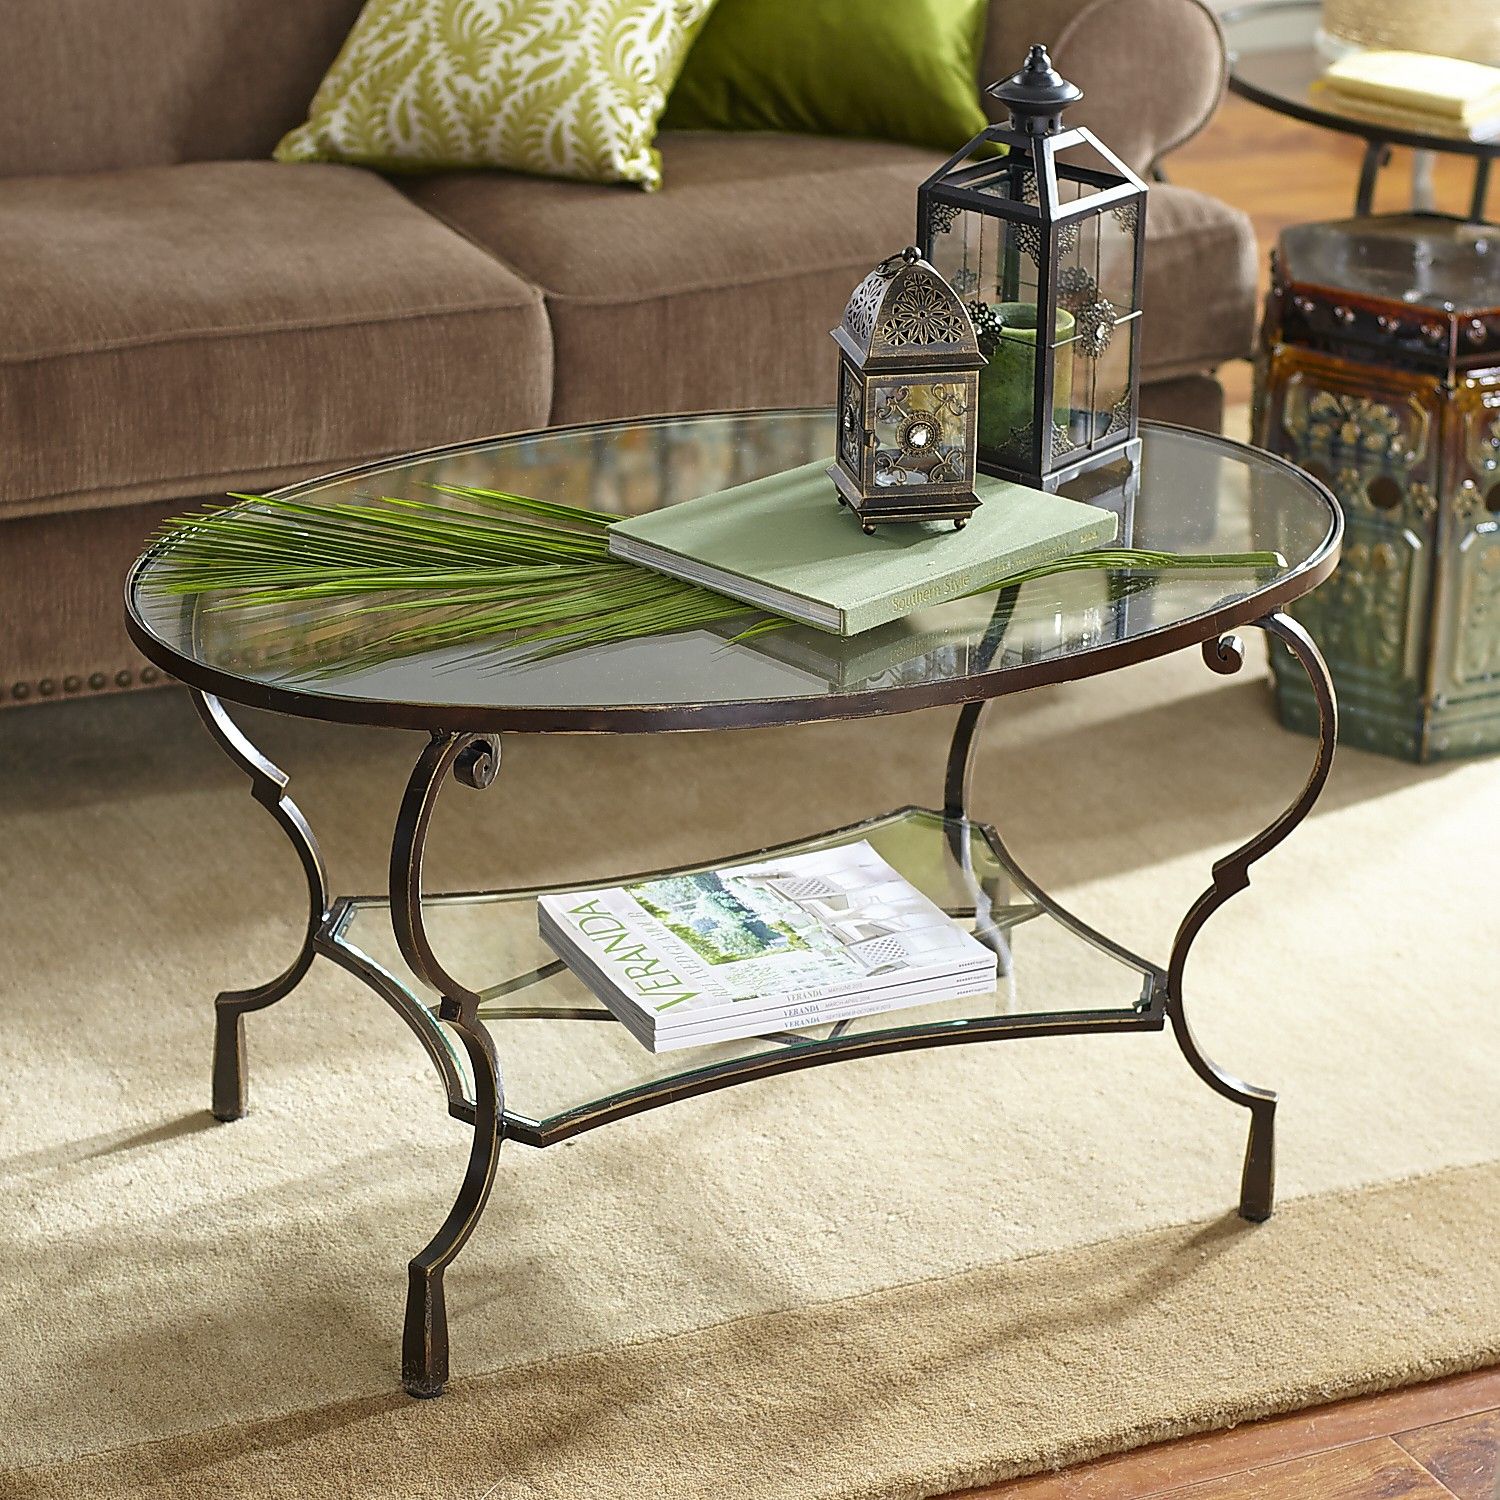 Chasca Glass Top Oval Coffee Table – Pier1 For Oval Glass Coffee Tables (View 2 of 20)